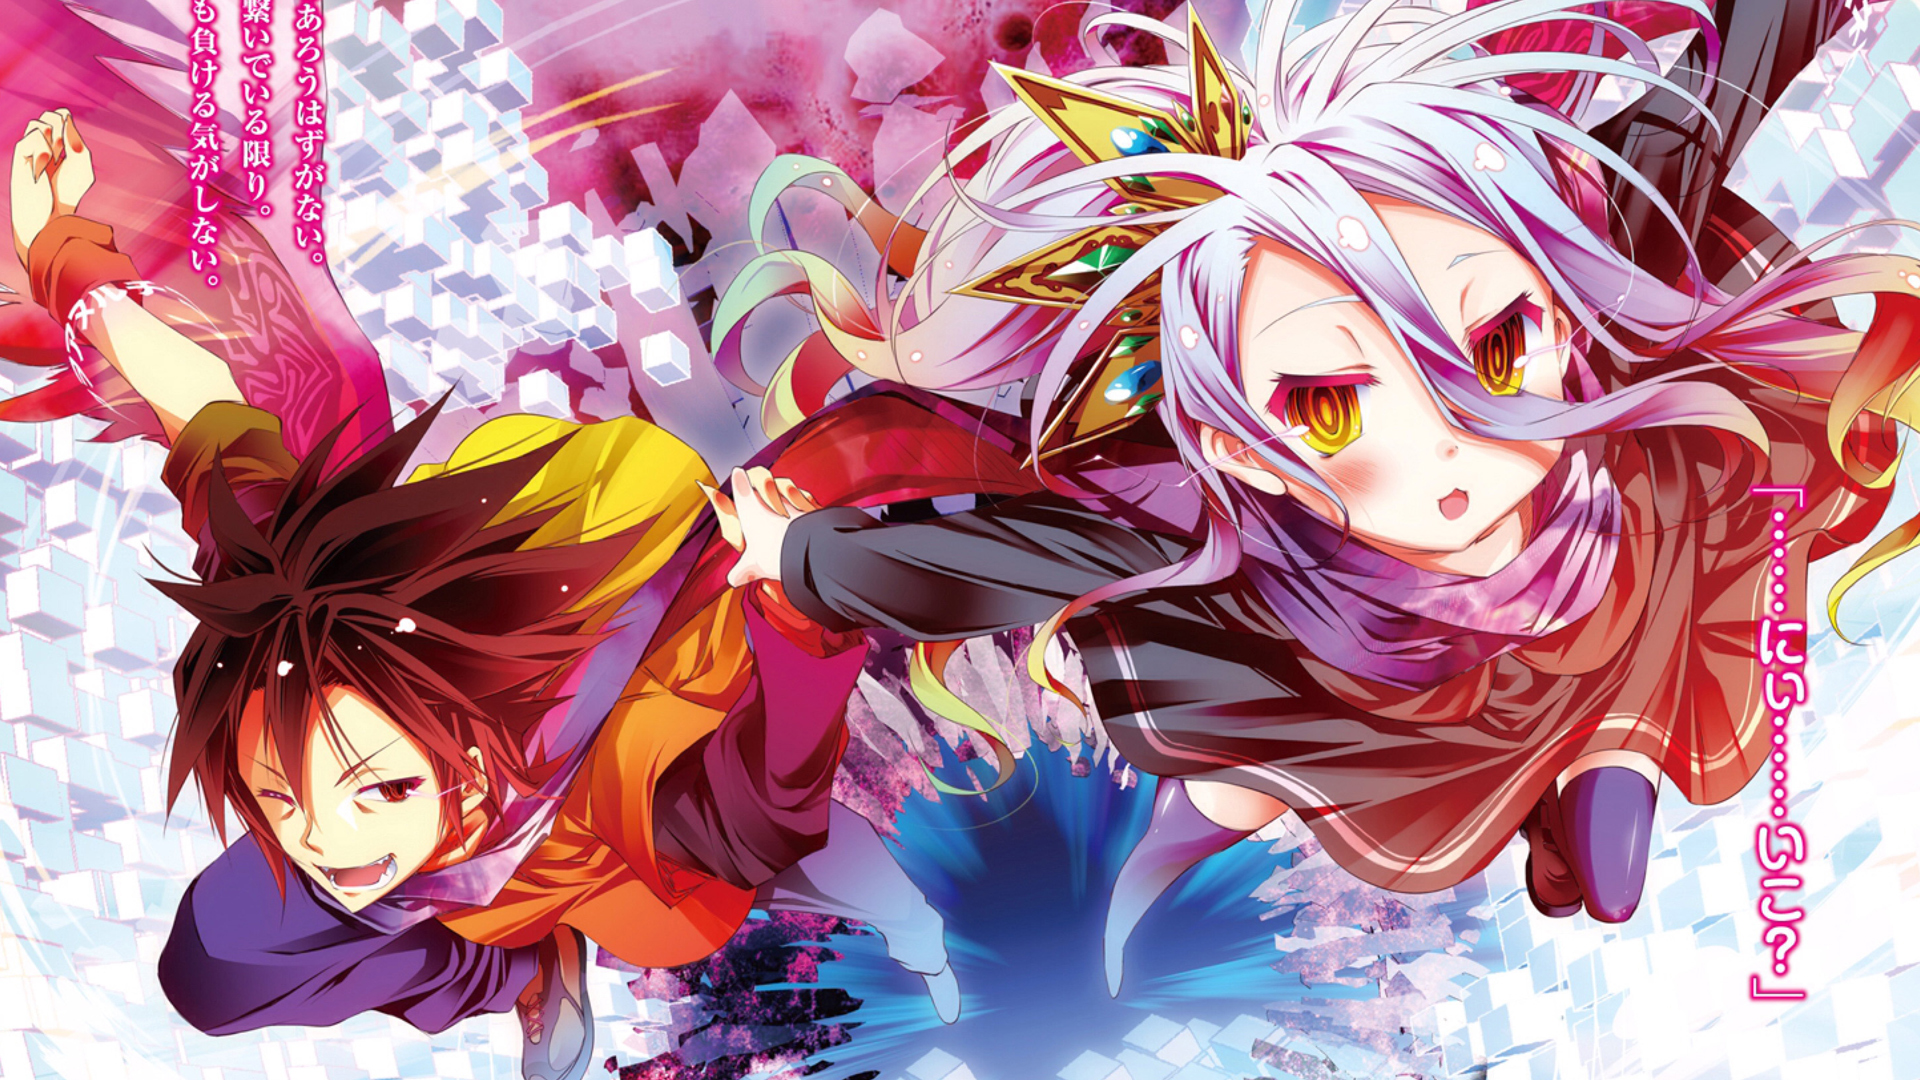 No Game No Life Backgrounds, Compatible - PC, Mobile, Gadgets| 1920x1080 px